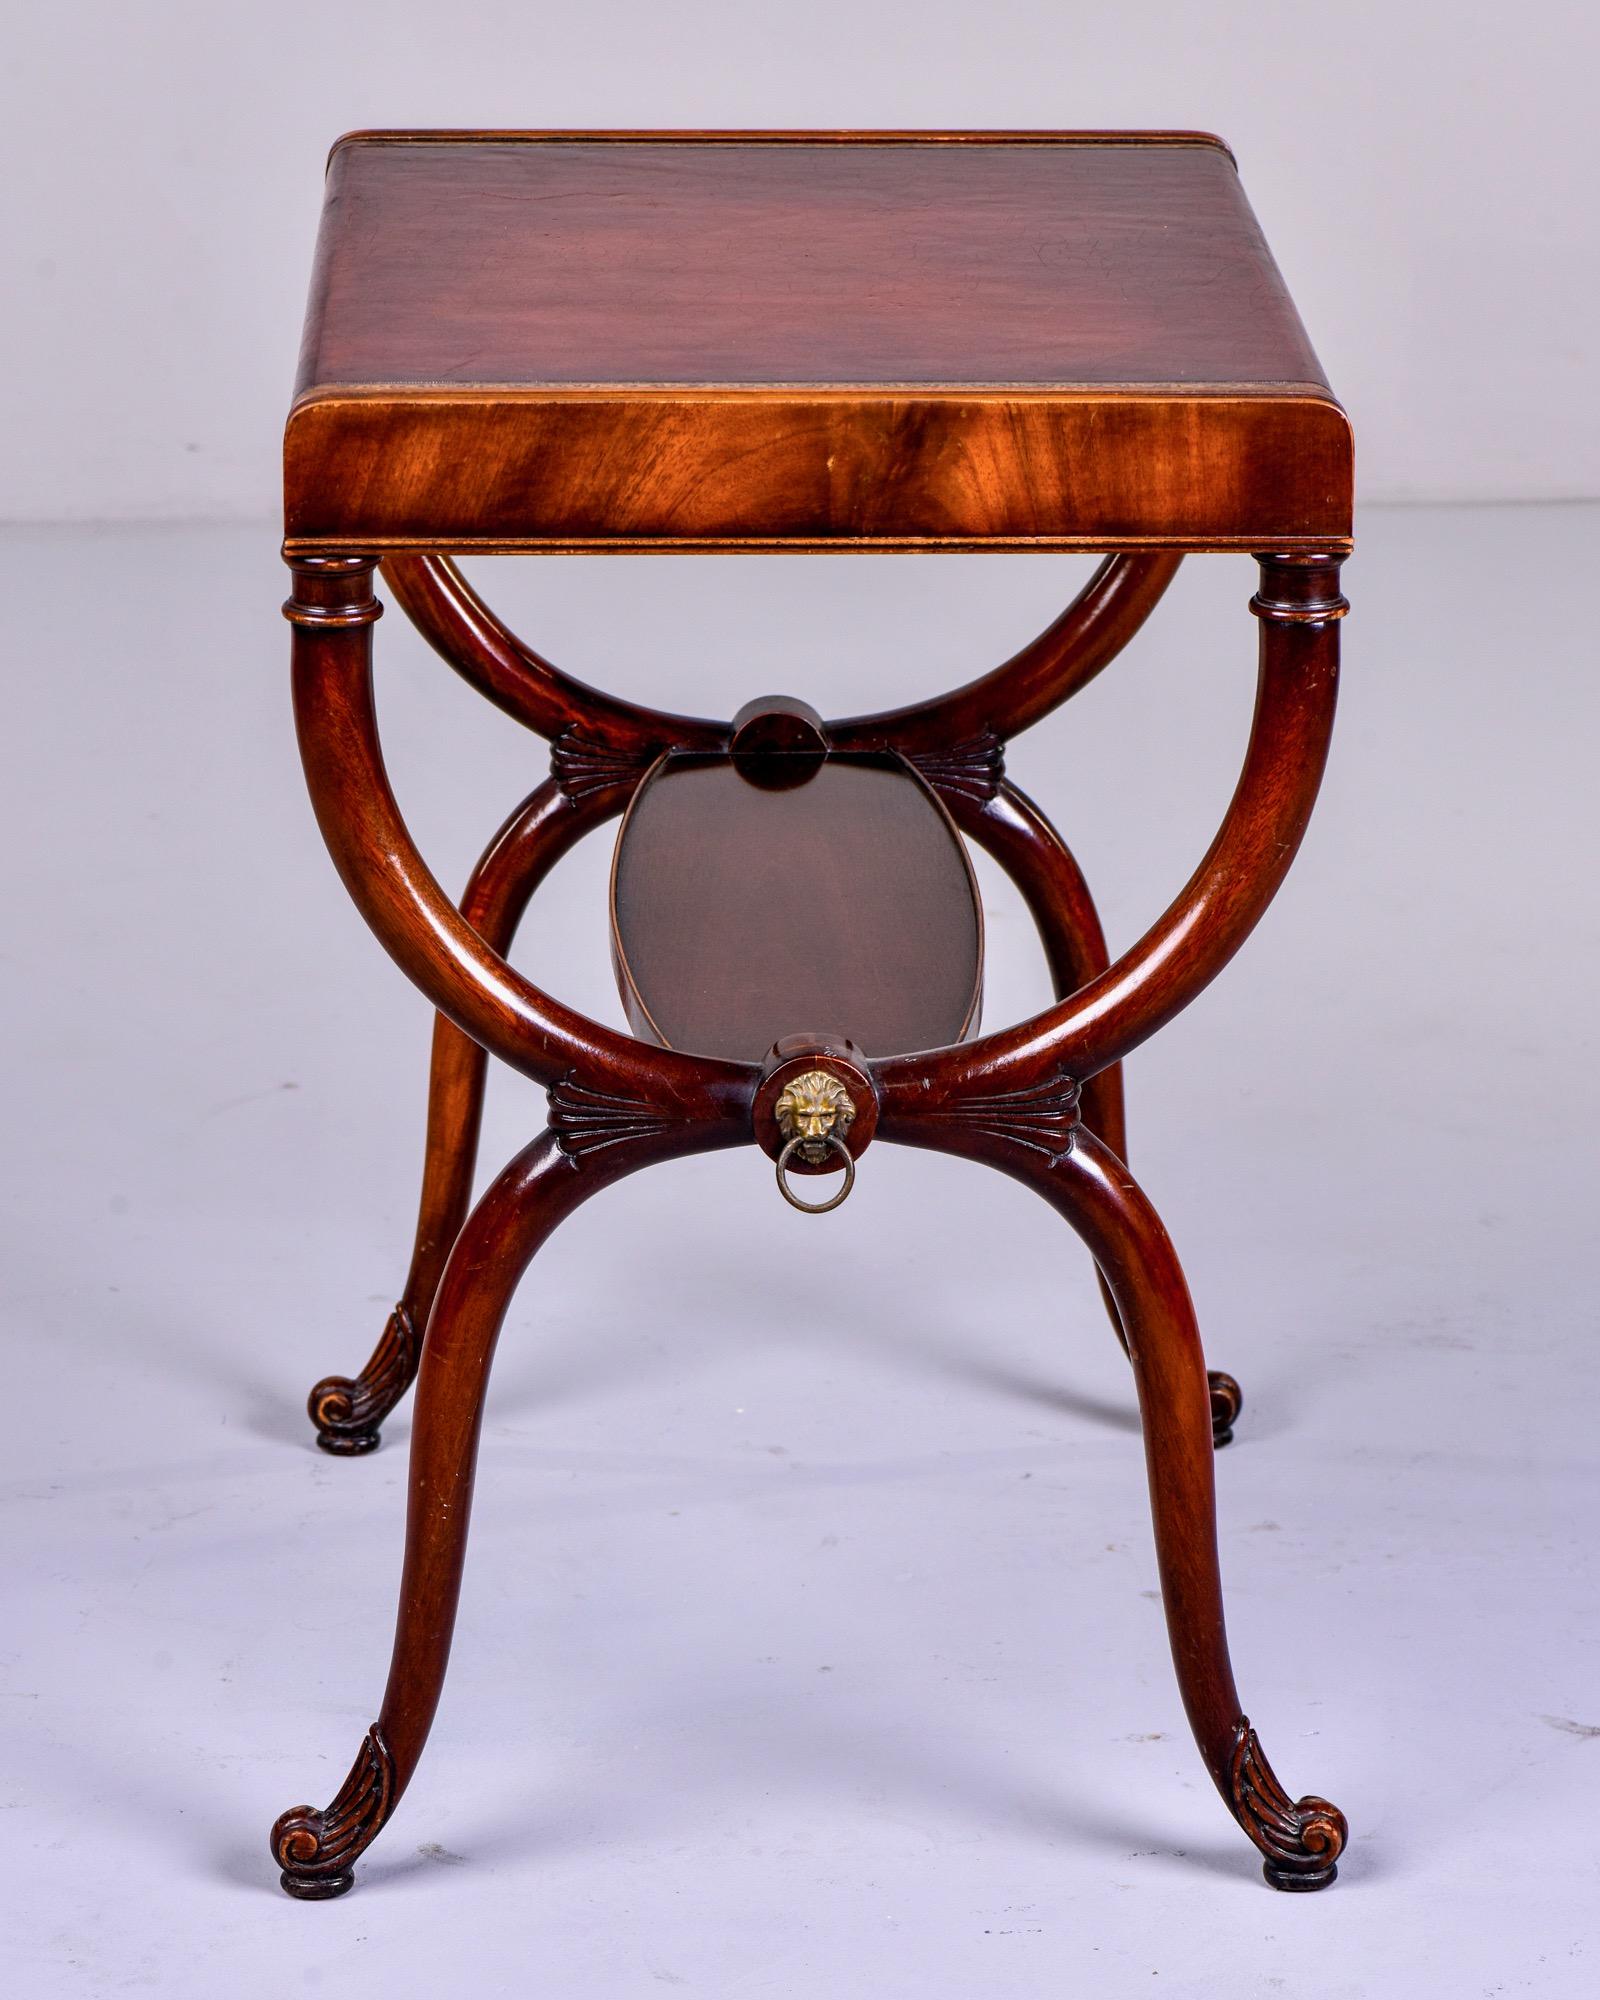 20th Century English Regency Style Side Table with Tooled Red Leather Top